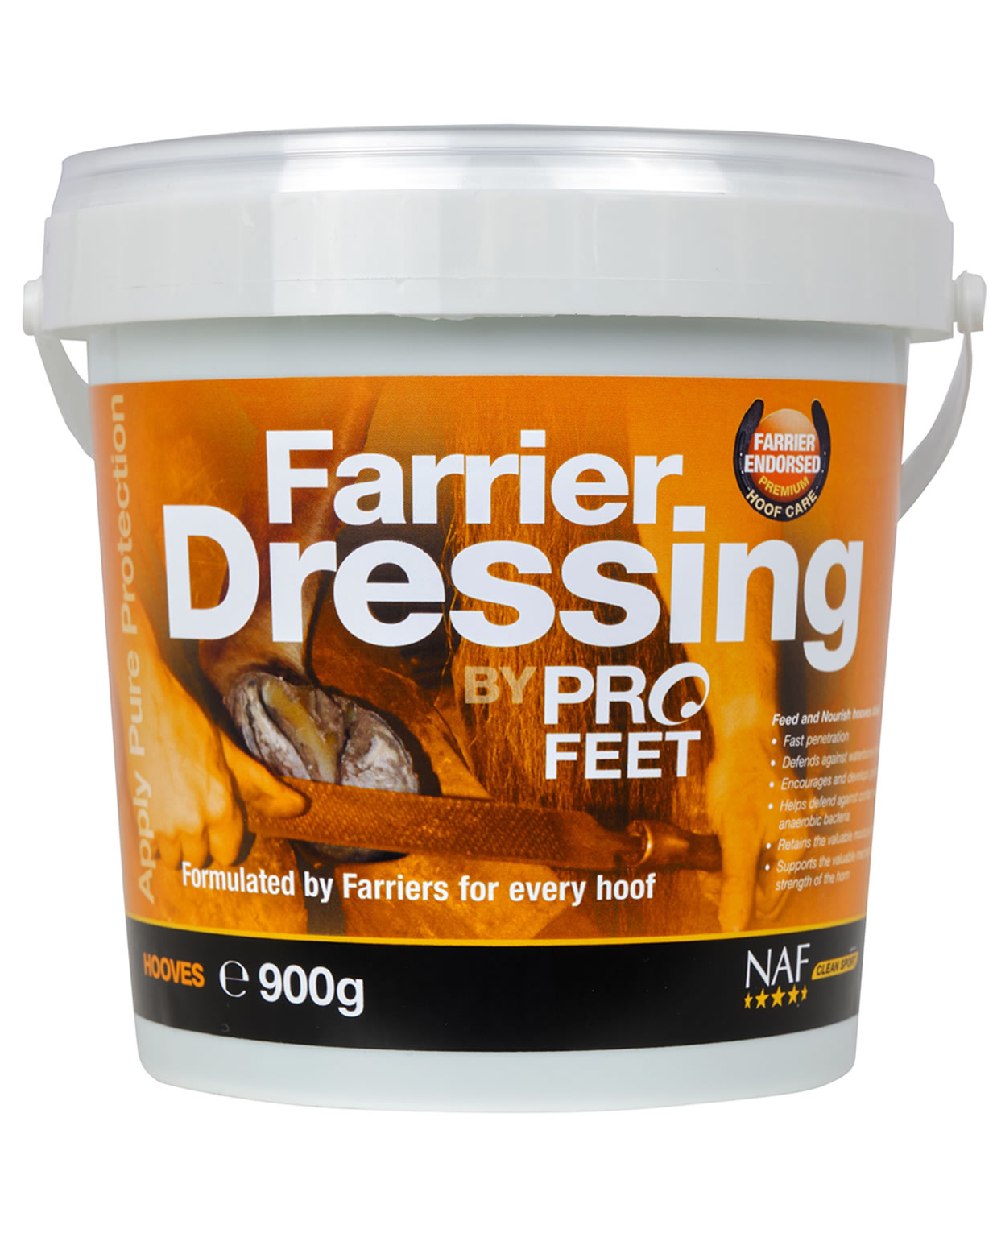 NAF Five Star Profeet Farrier Dressing 900gm on white background